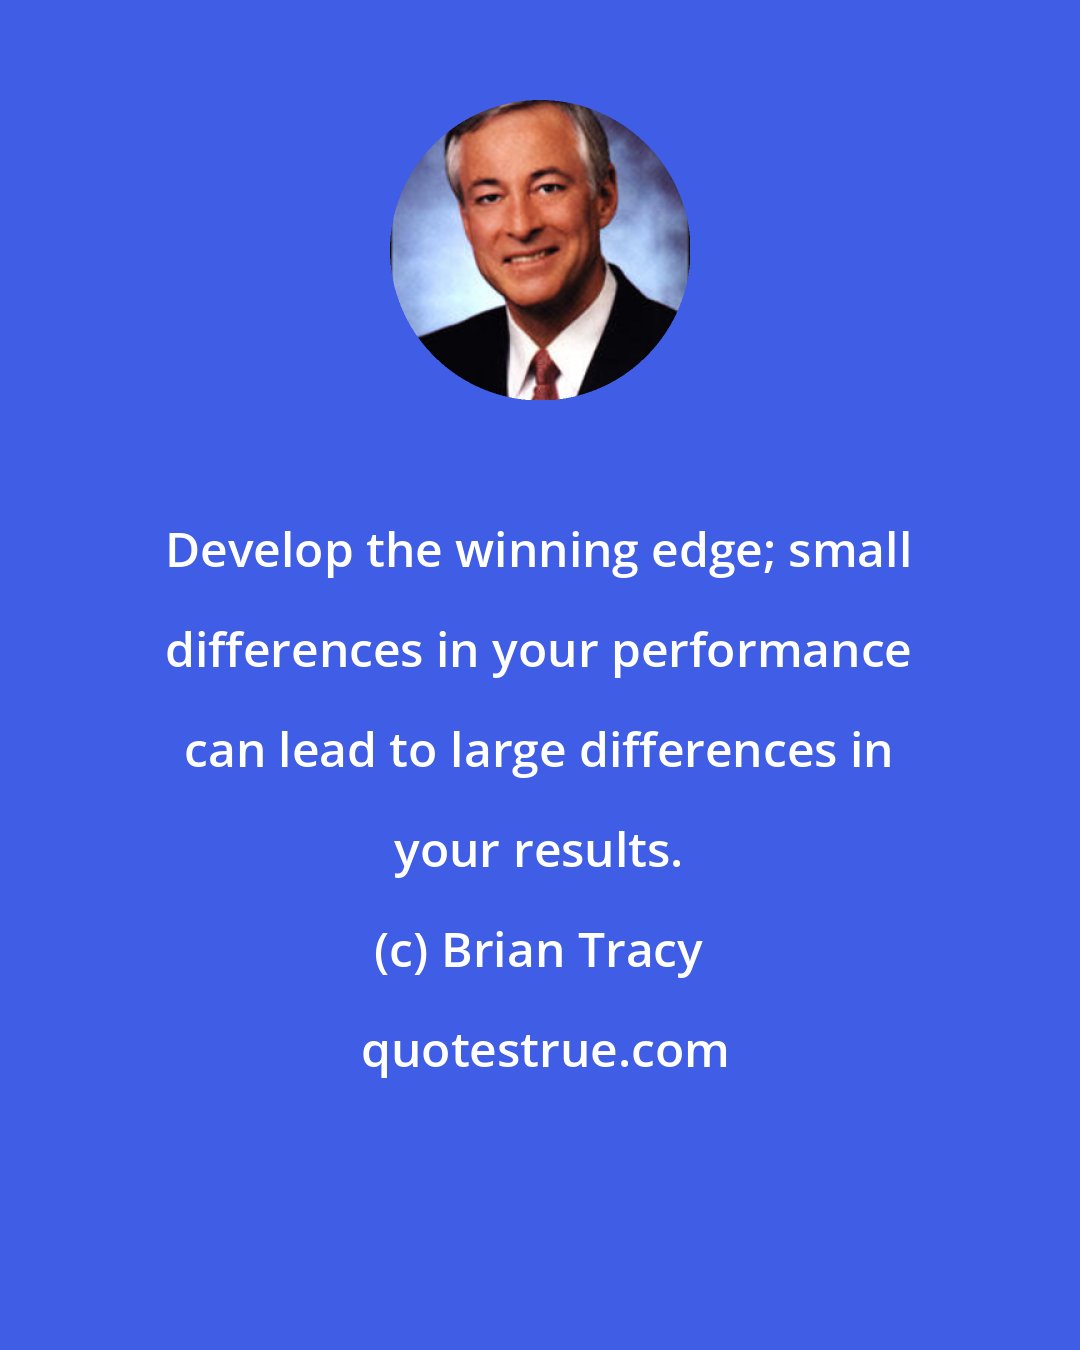 Brian Tracy: Develop the winning edge; small differences in your performance can lead to large differences in your results.